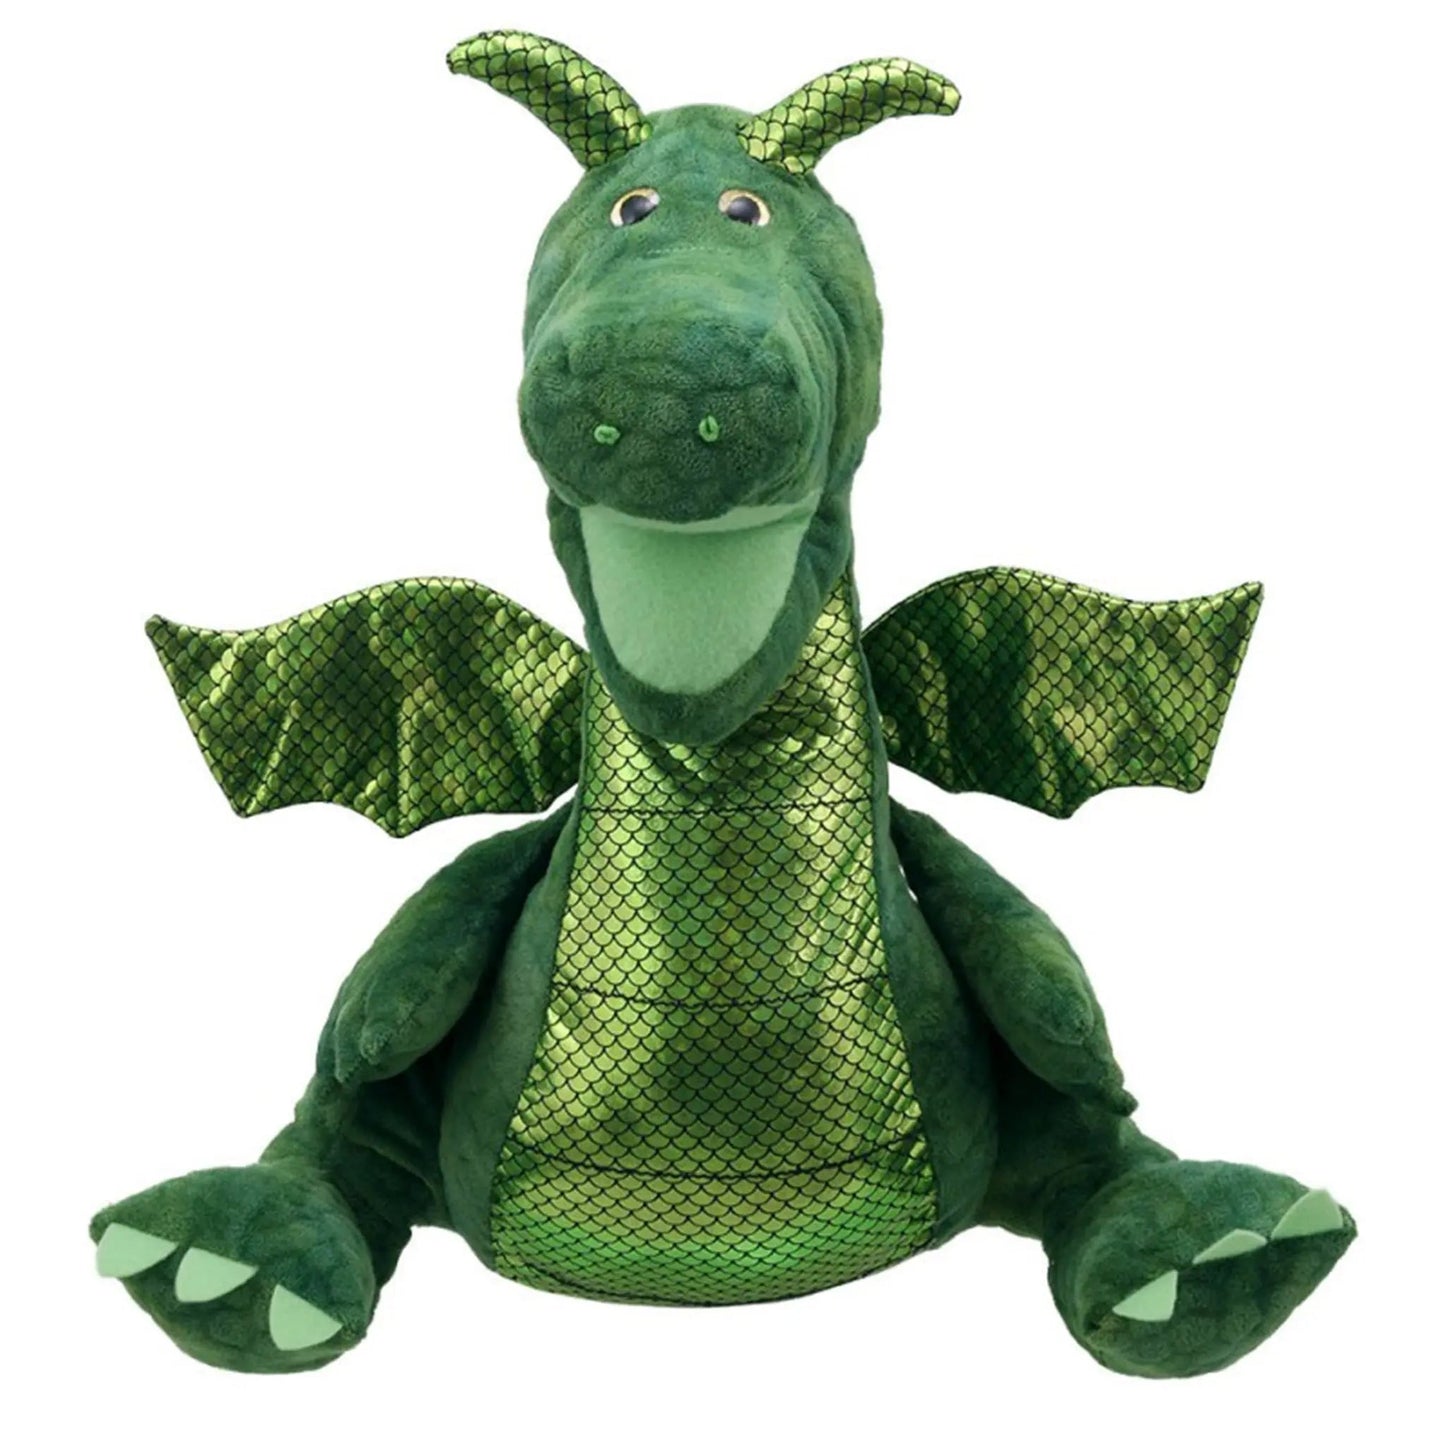 Enchanted Green Dragon Puppet - The Puppet Company - The Forgotten Toy Shop